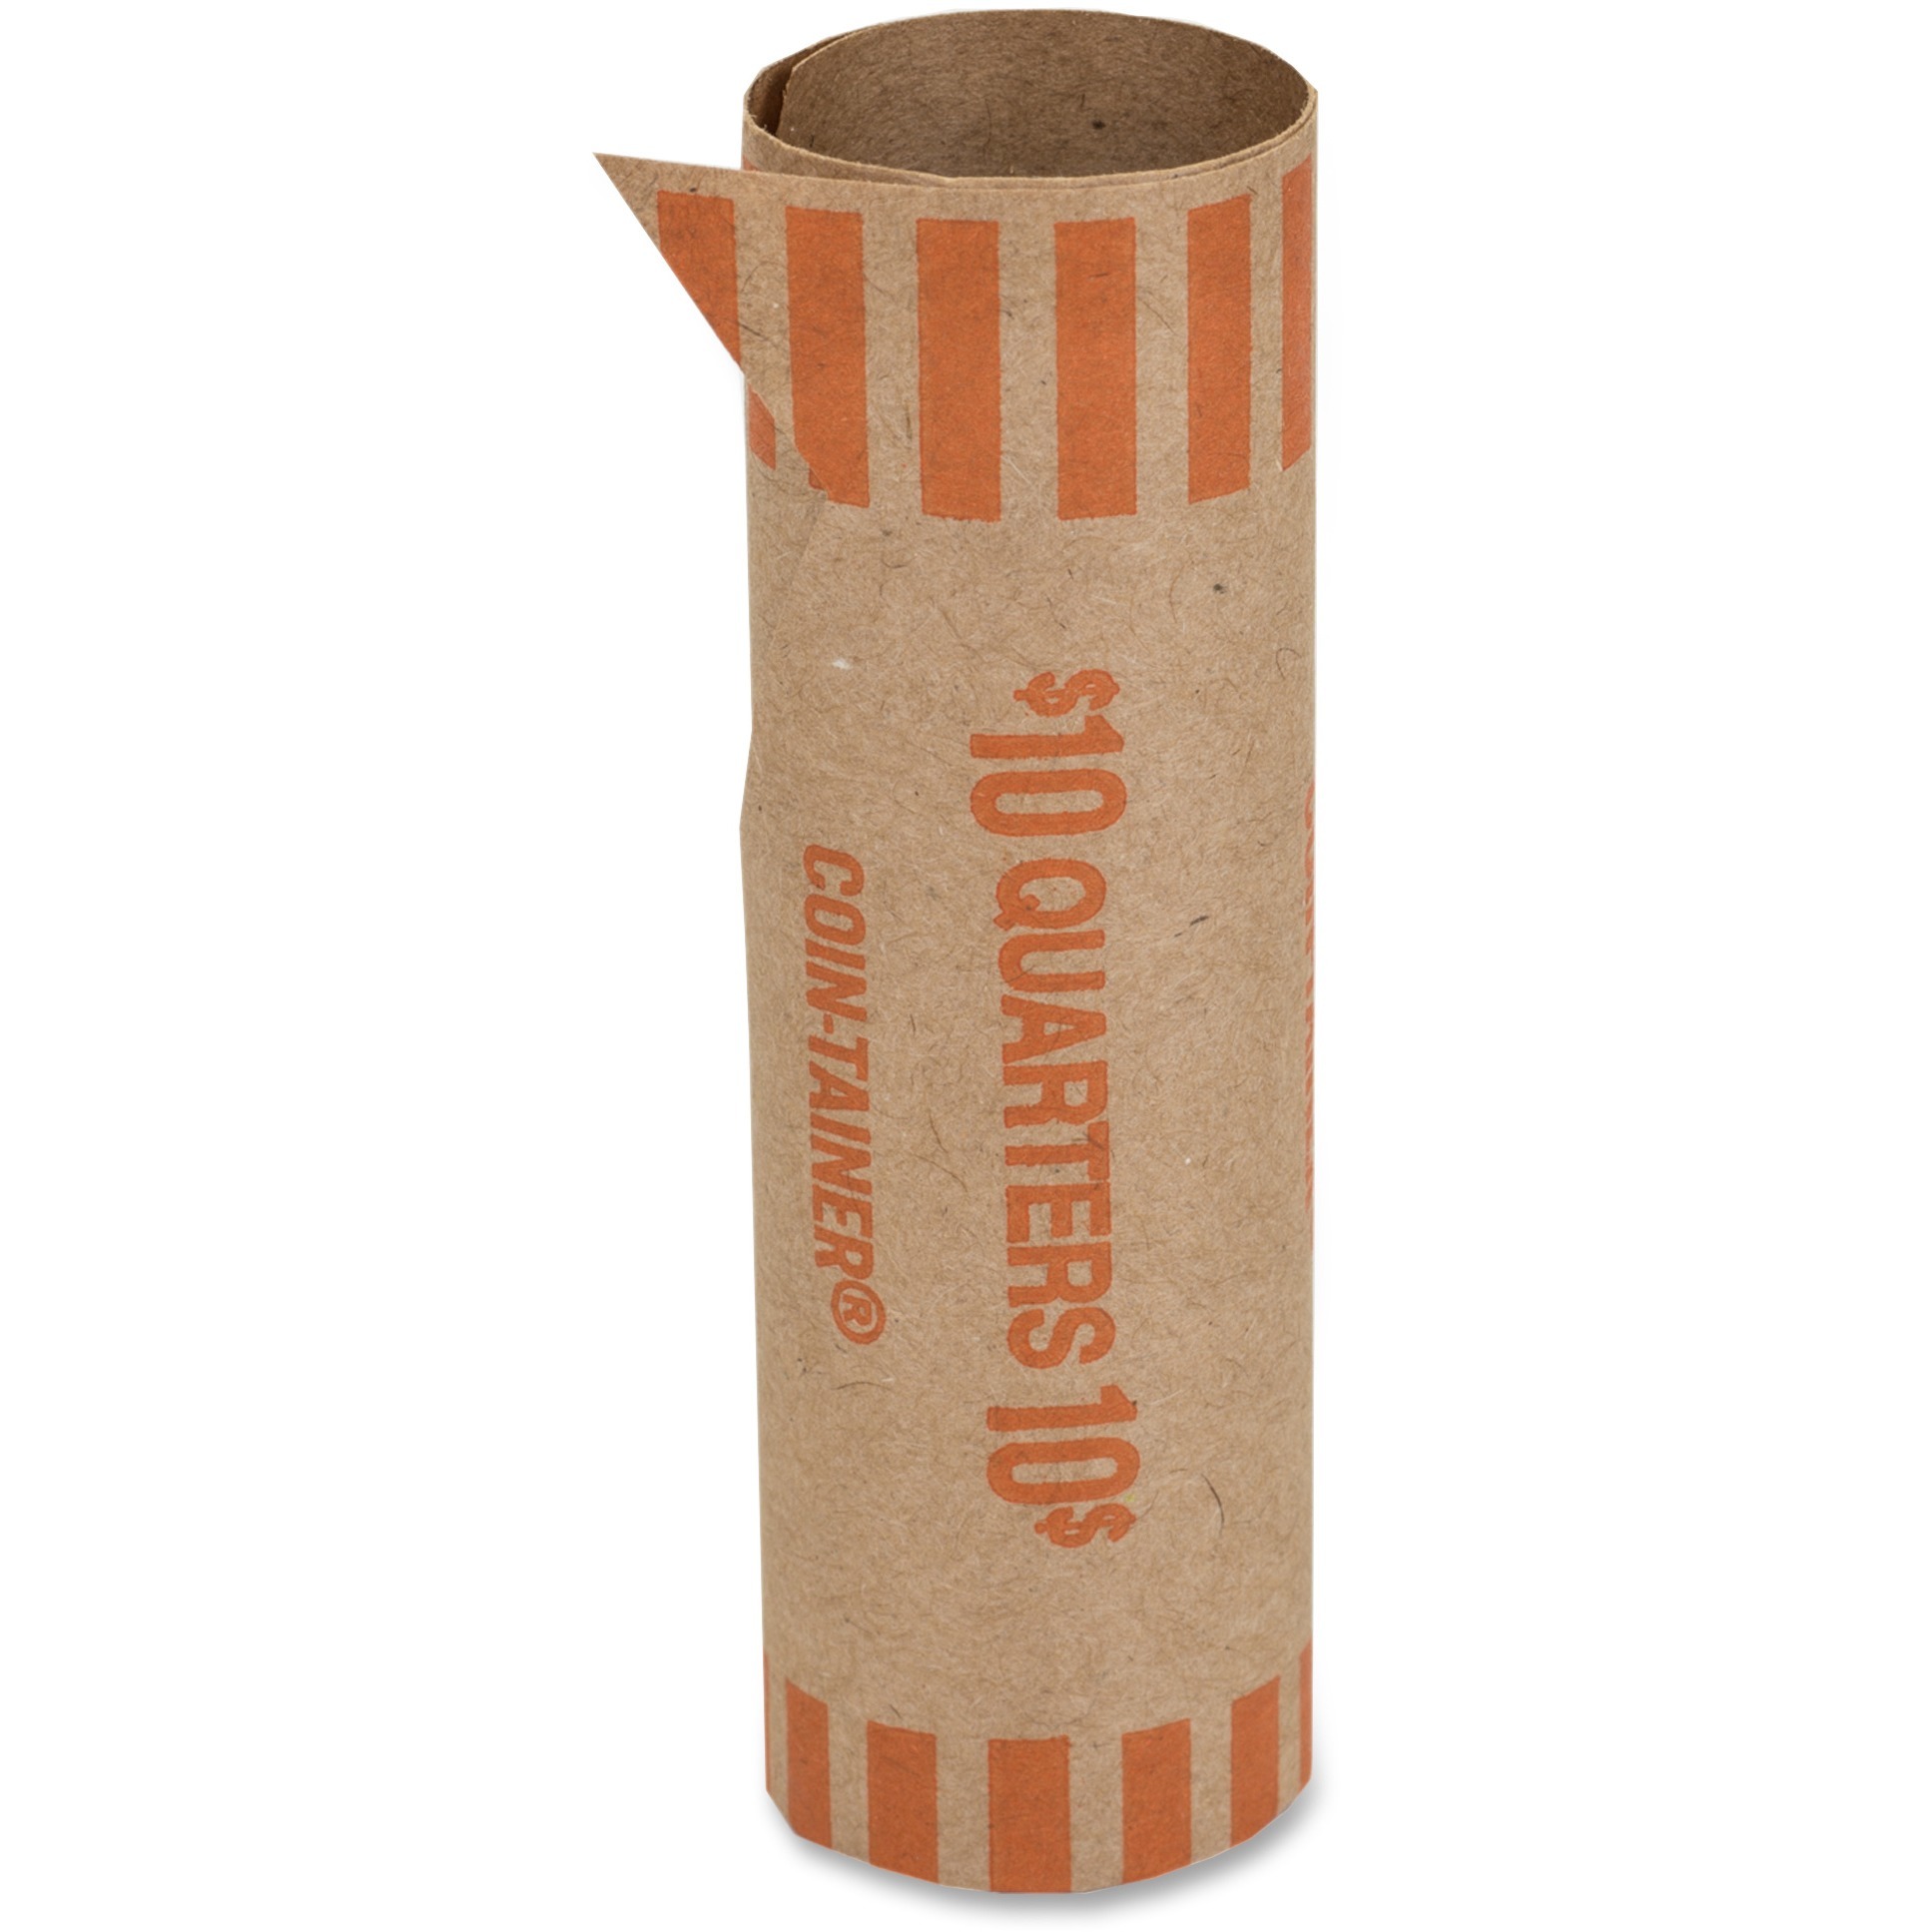 PAP-R Tubular Coin Wrappers - Total $10 in 40 Coins of 25 Denomination - Heavy Duty, Burst Resistant - Kraft - Orange